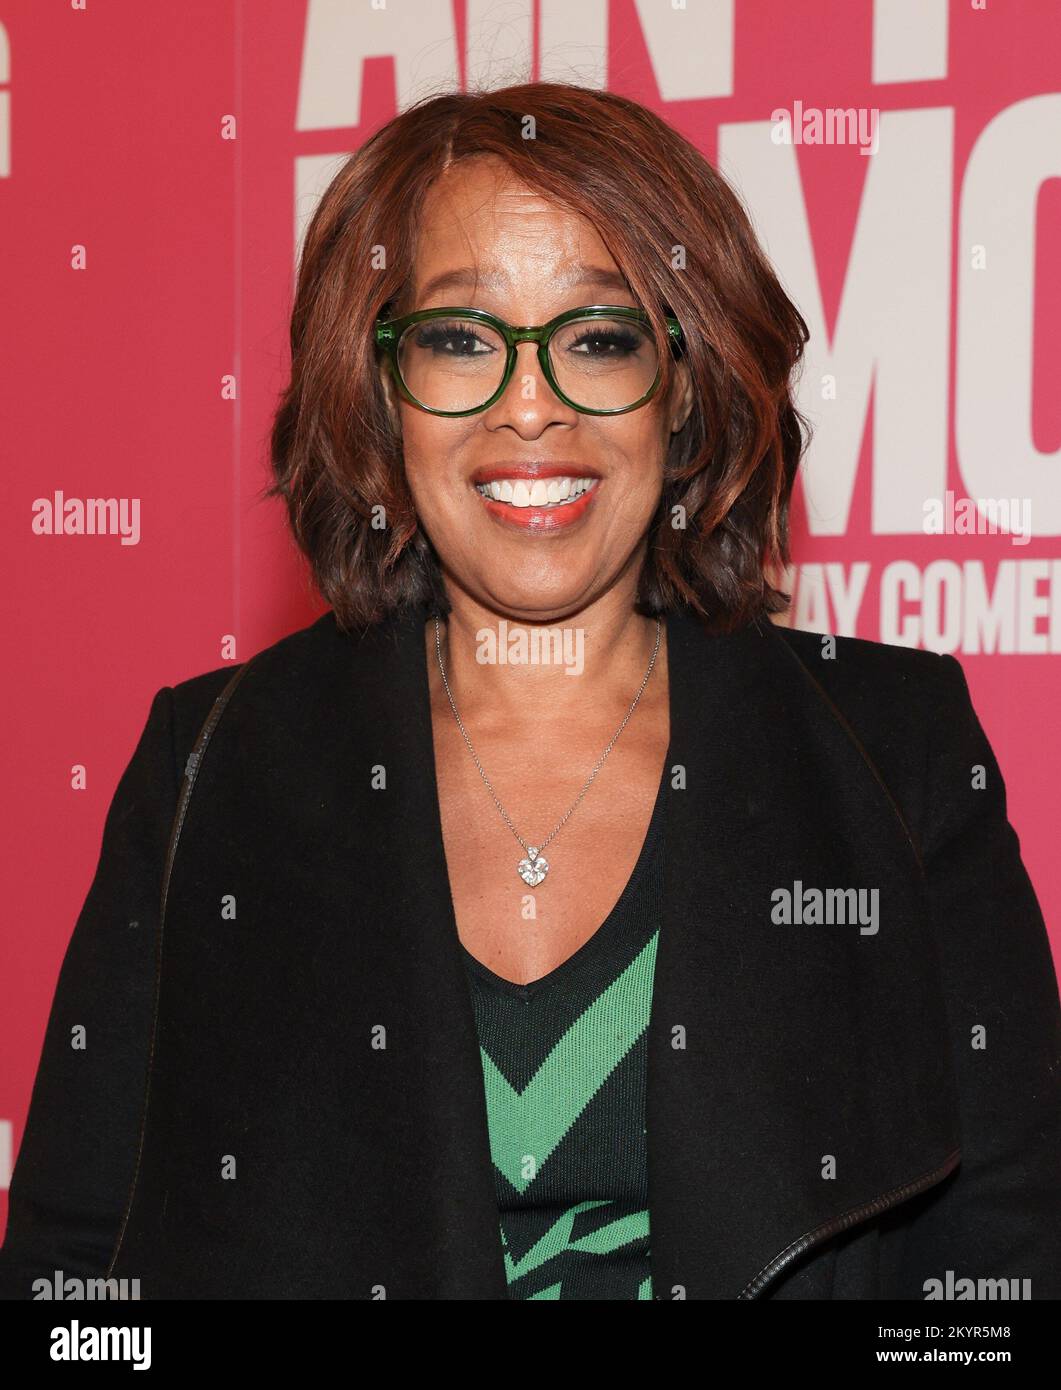 New York, NY, USA. 1st Dec, 2022. Gayle King at arrivals for AIN'T NO MO' Opening Night on Broadway, Belasco Theatre, New York, NY December 1, 2022. Credit: CJ Rivera/Everett Collection/Alamy Live News Stock Photo